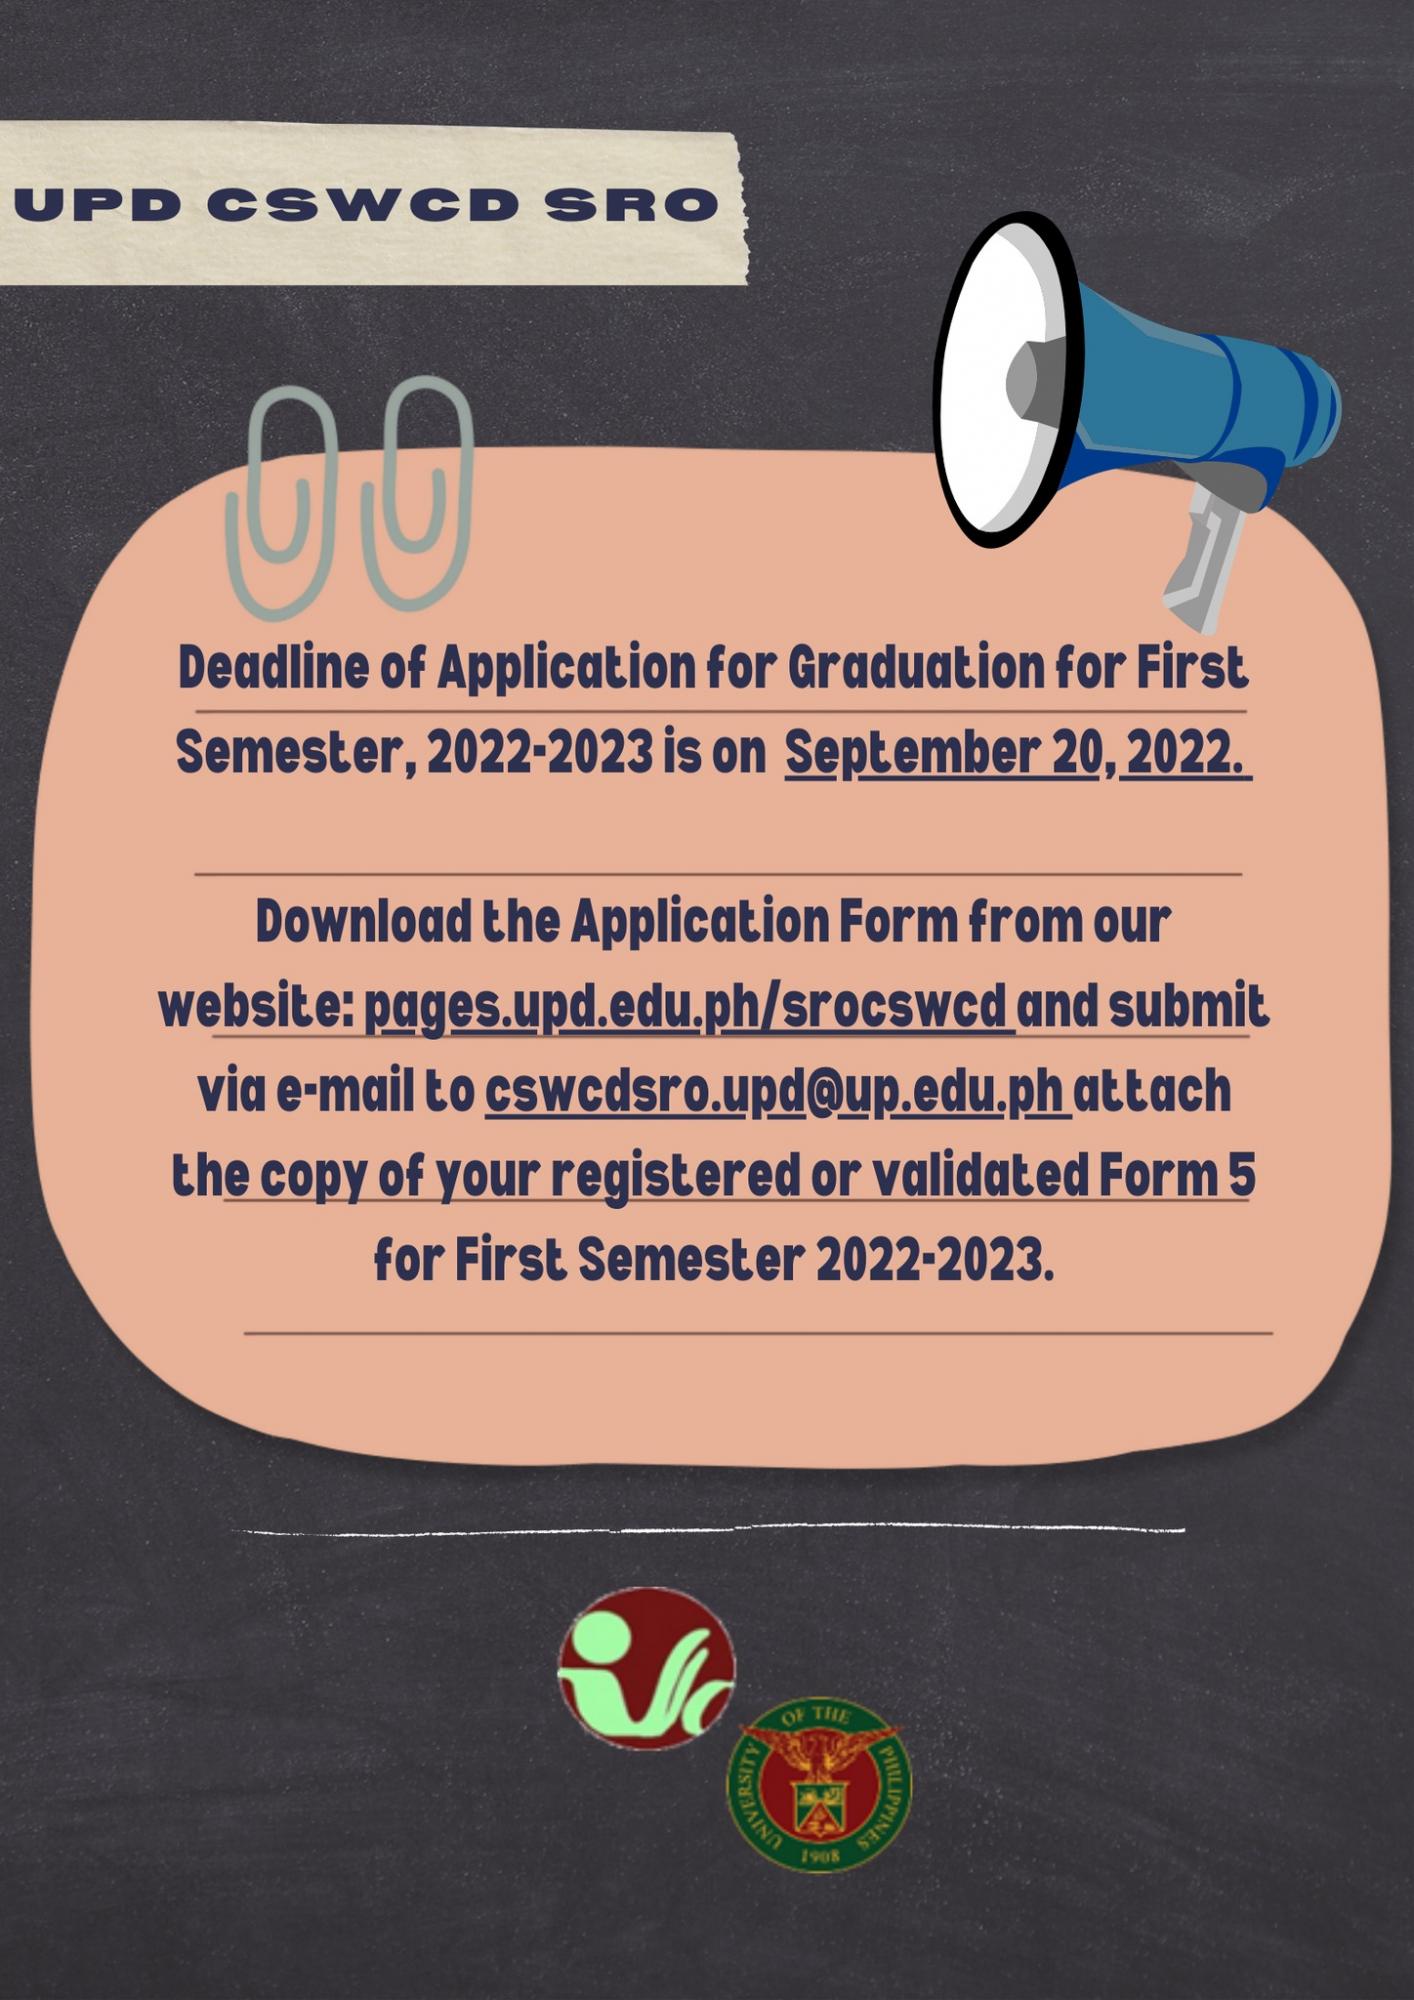 Application for Graduation for First Semester, 2022-2023